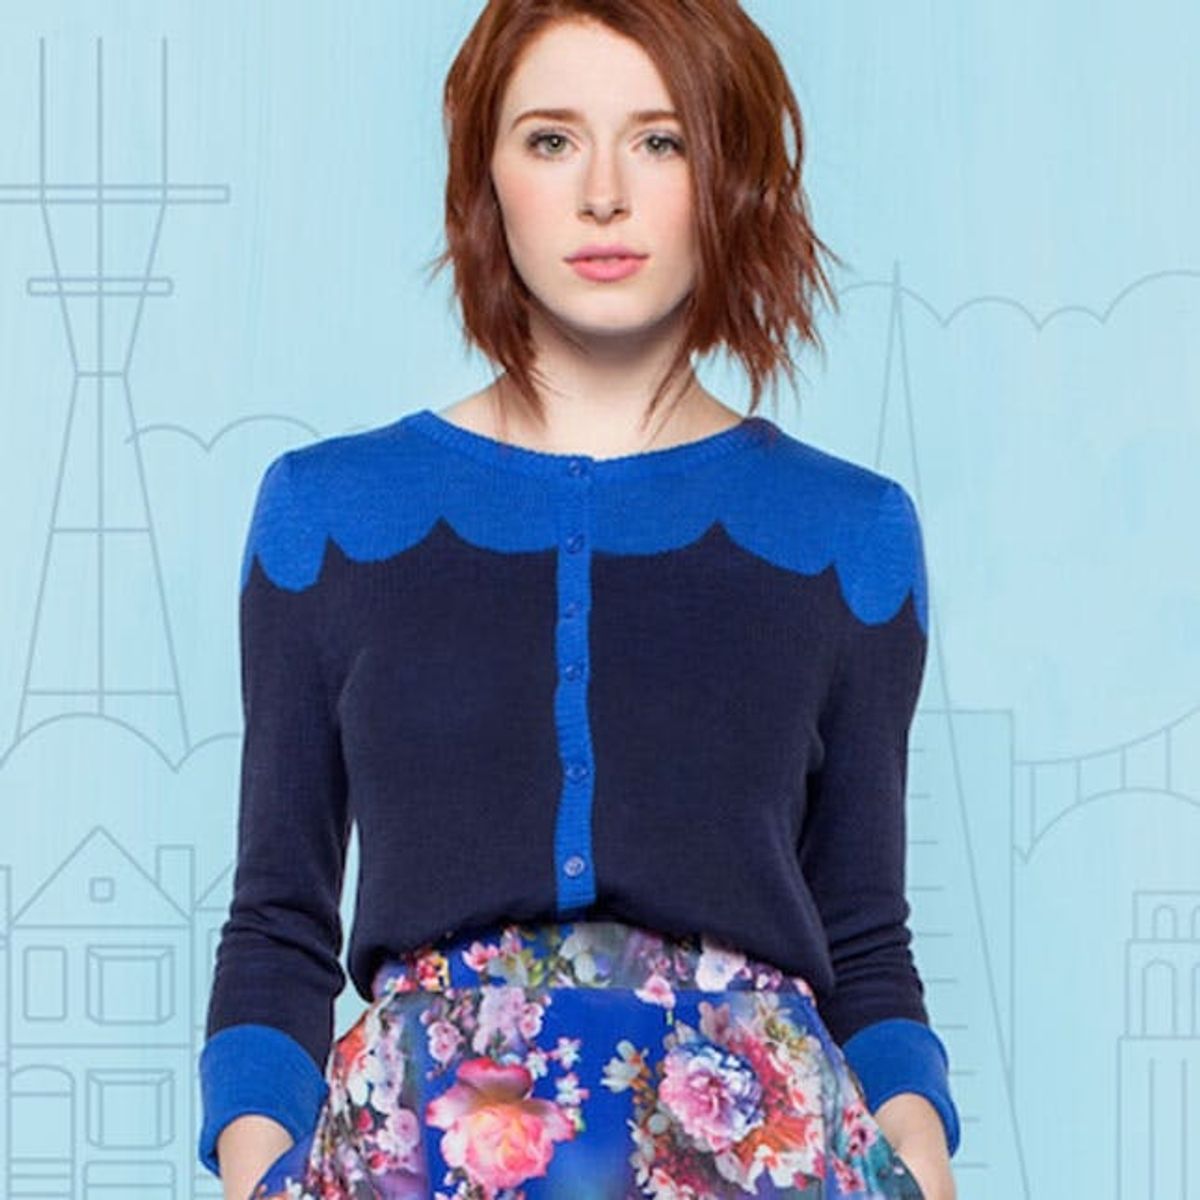 5 Reasons ModCloth’s San Francisco Pop-Up Shop Is Worth Checking Out